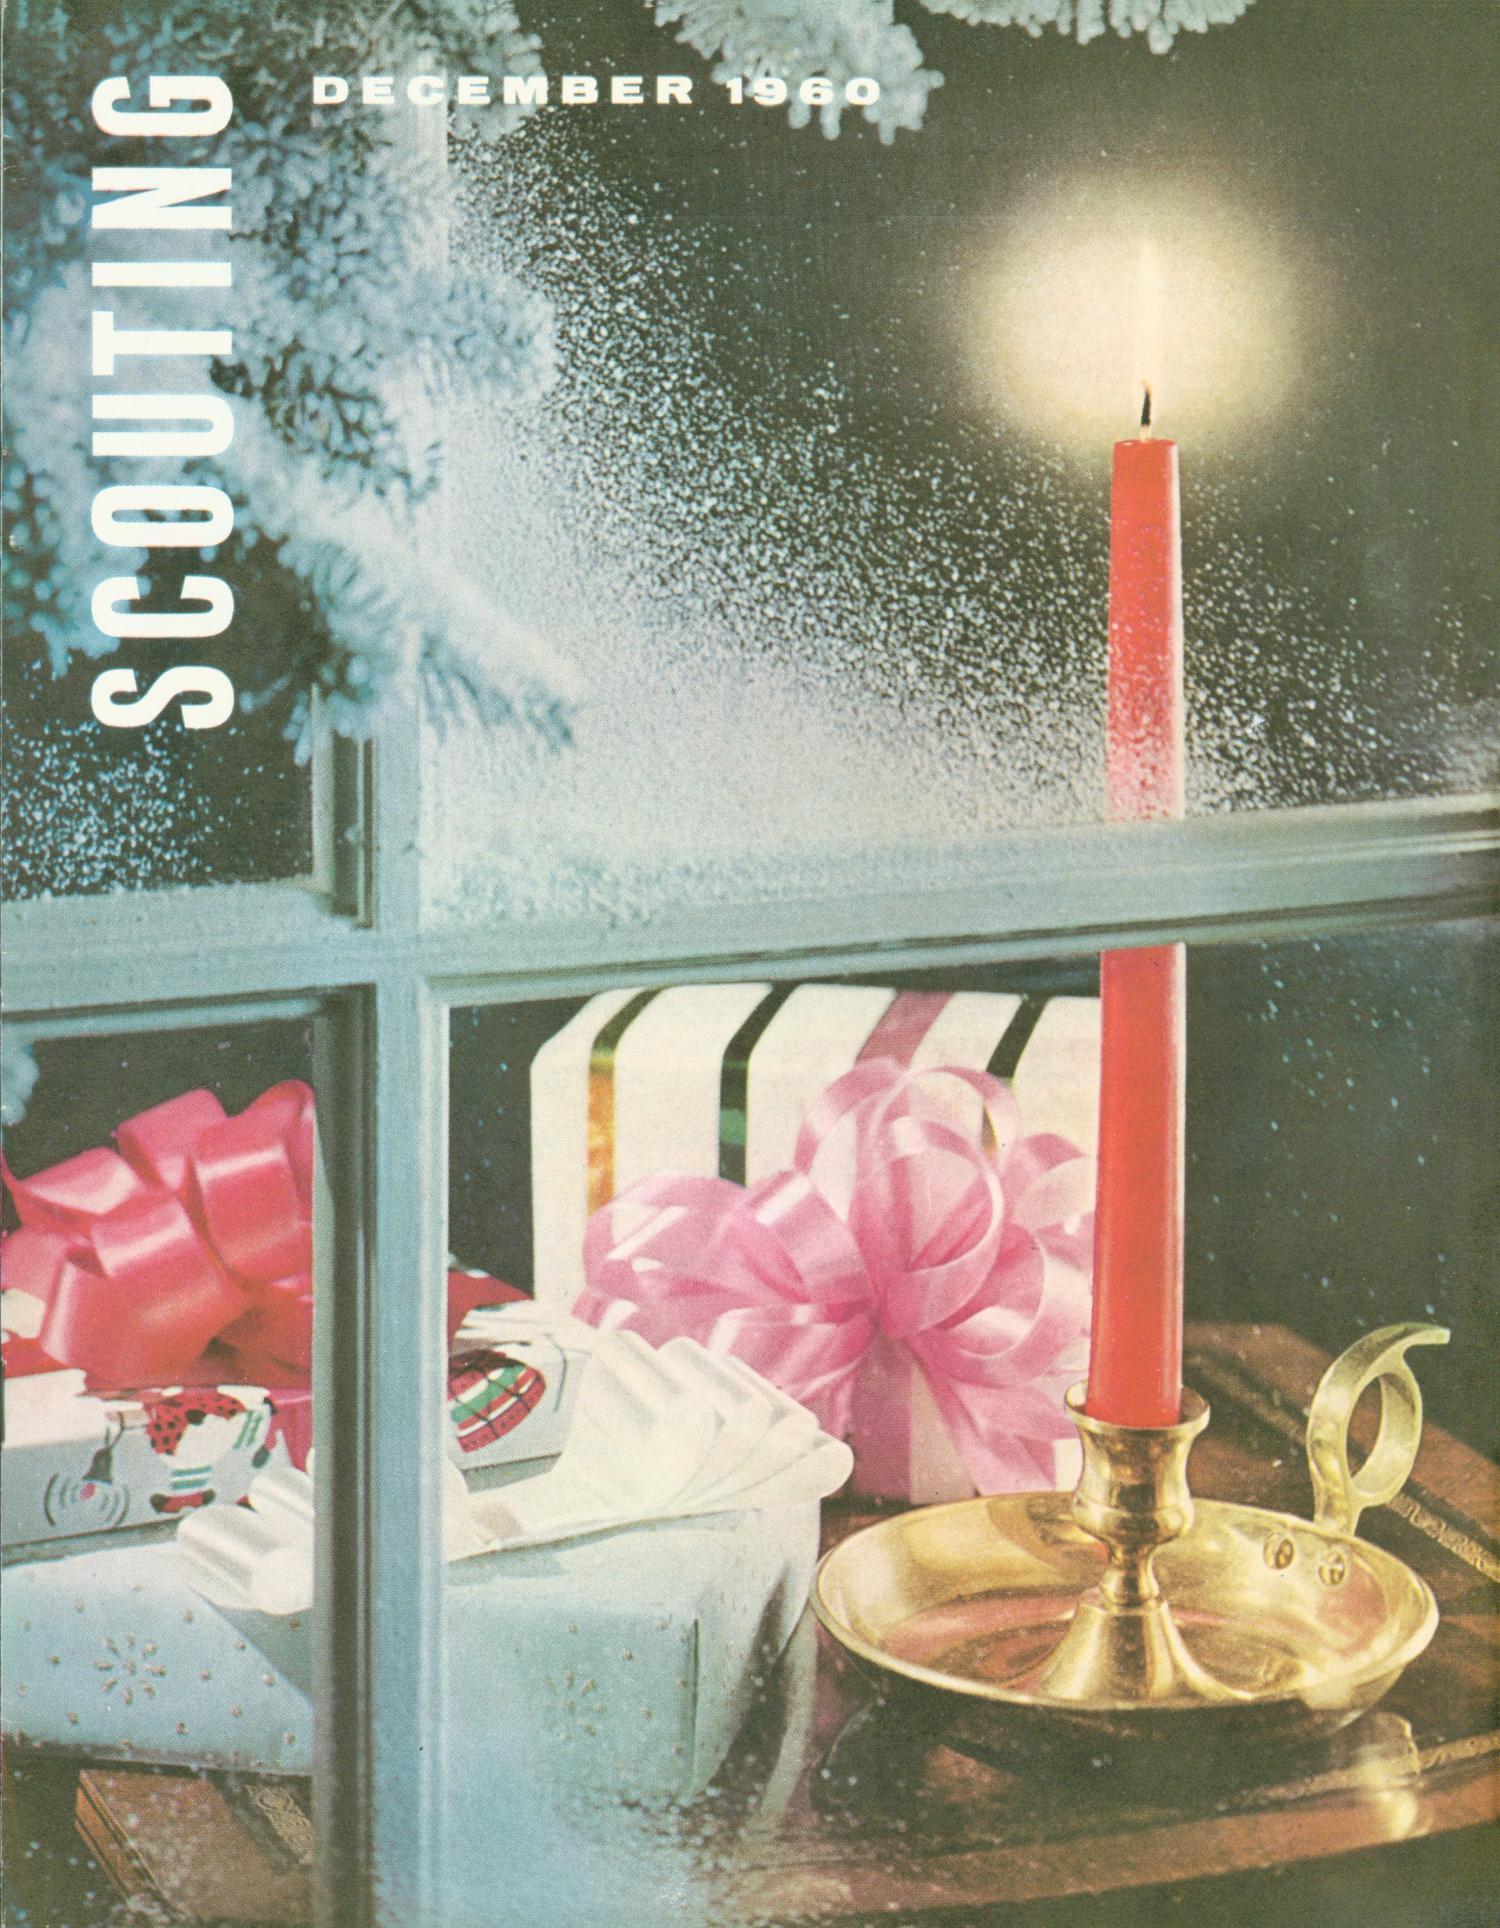 Scouting, Volume 48, Number 9, December 1960
                                                
                                                    Front Cover
                                                